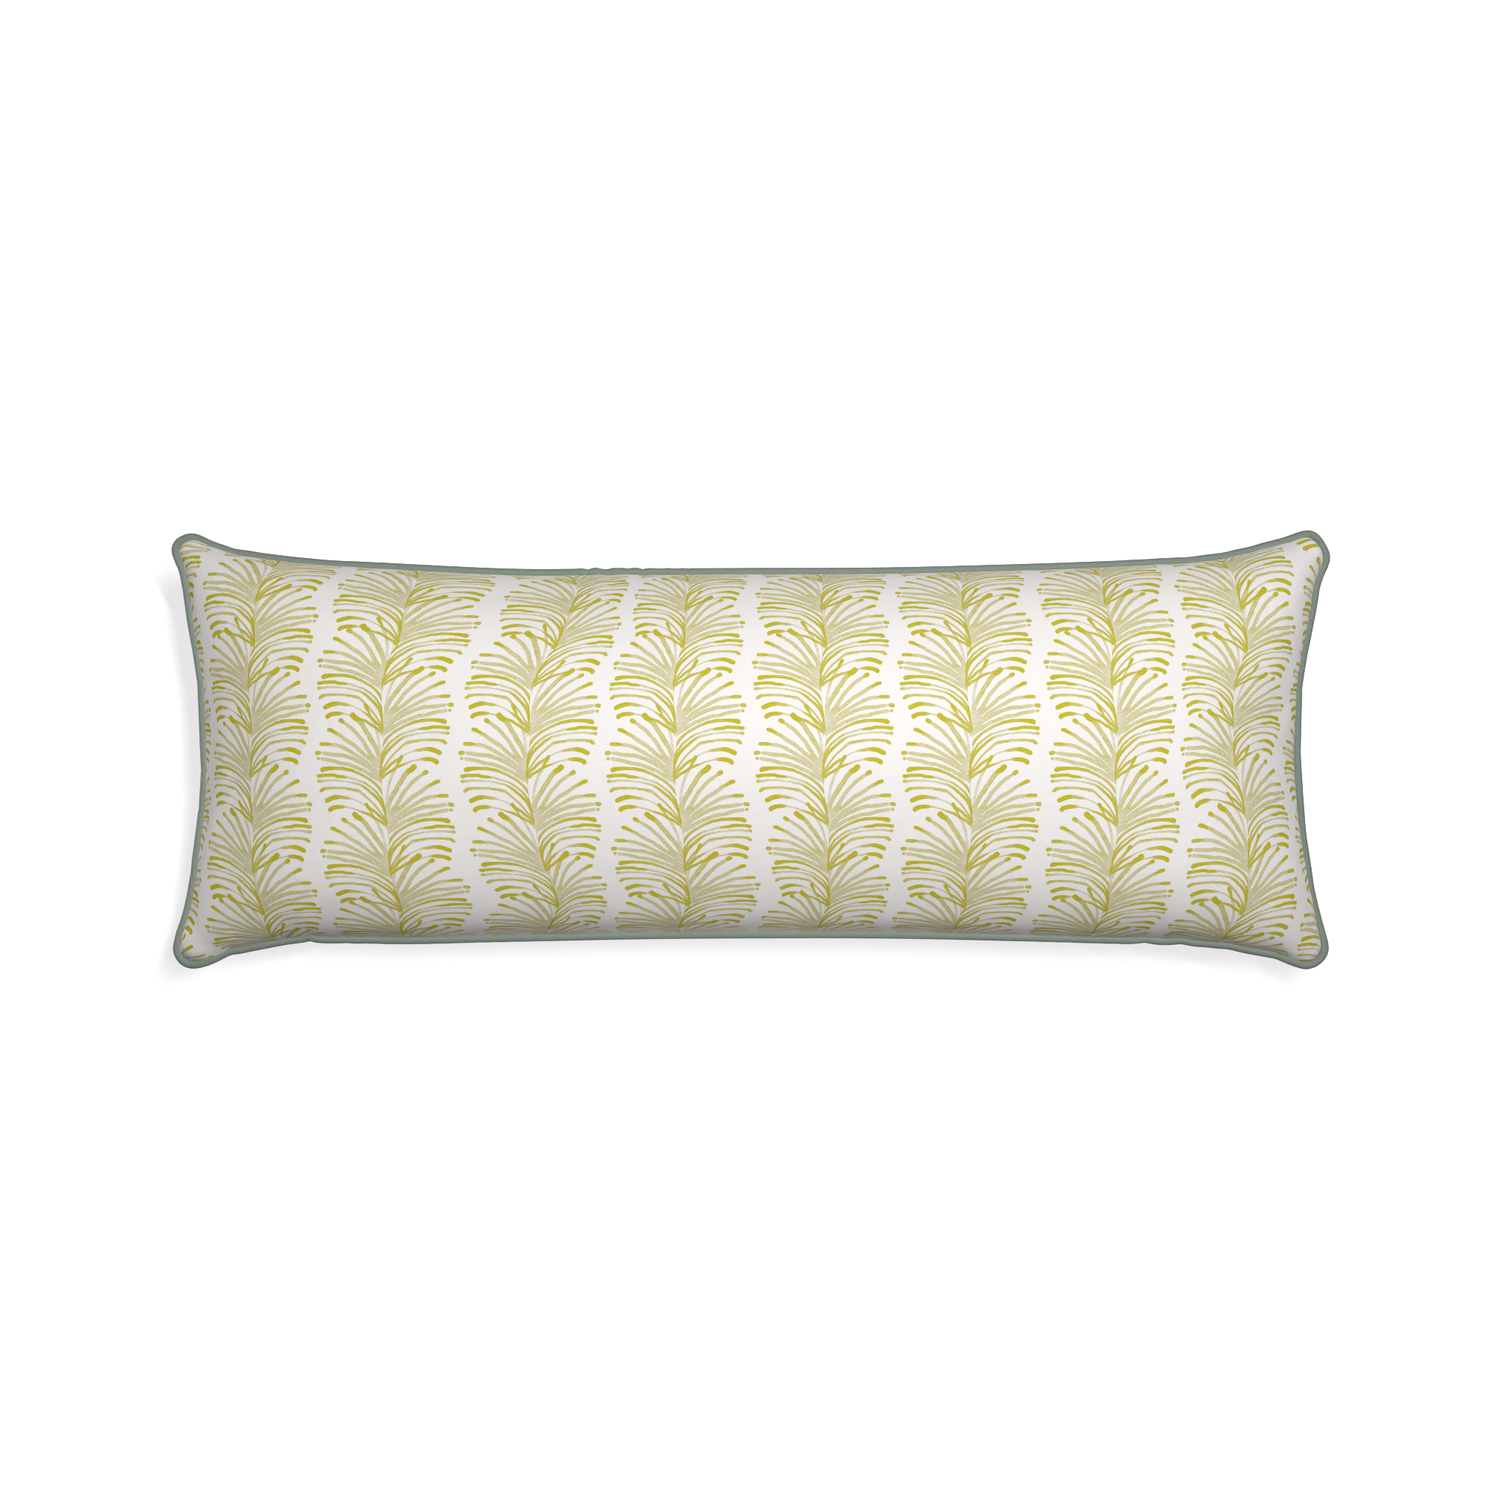 Xl-lumbar emma chartreuse custom yellow stripe chartreusepillow with sage piping on white background